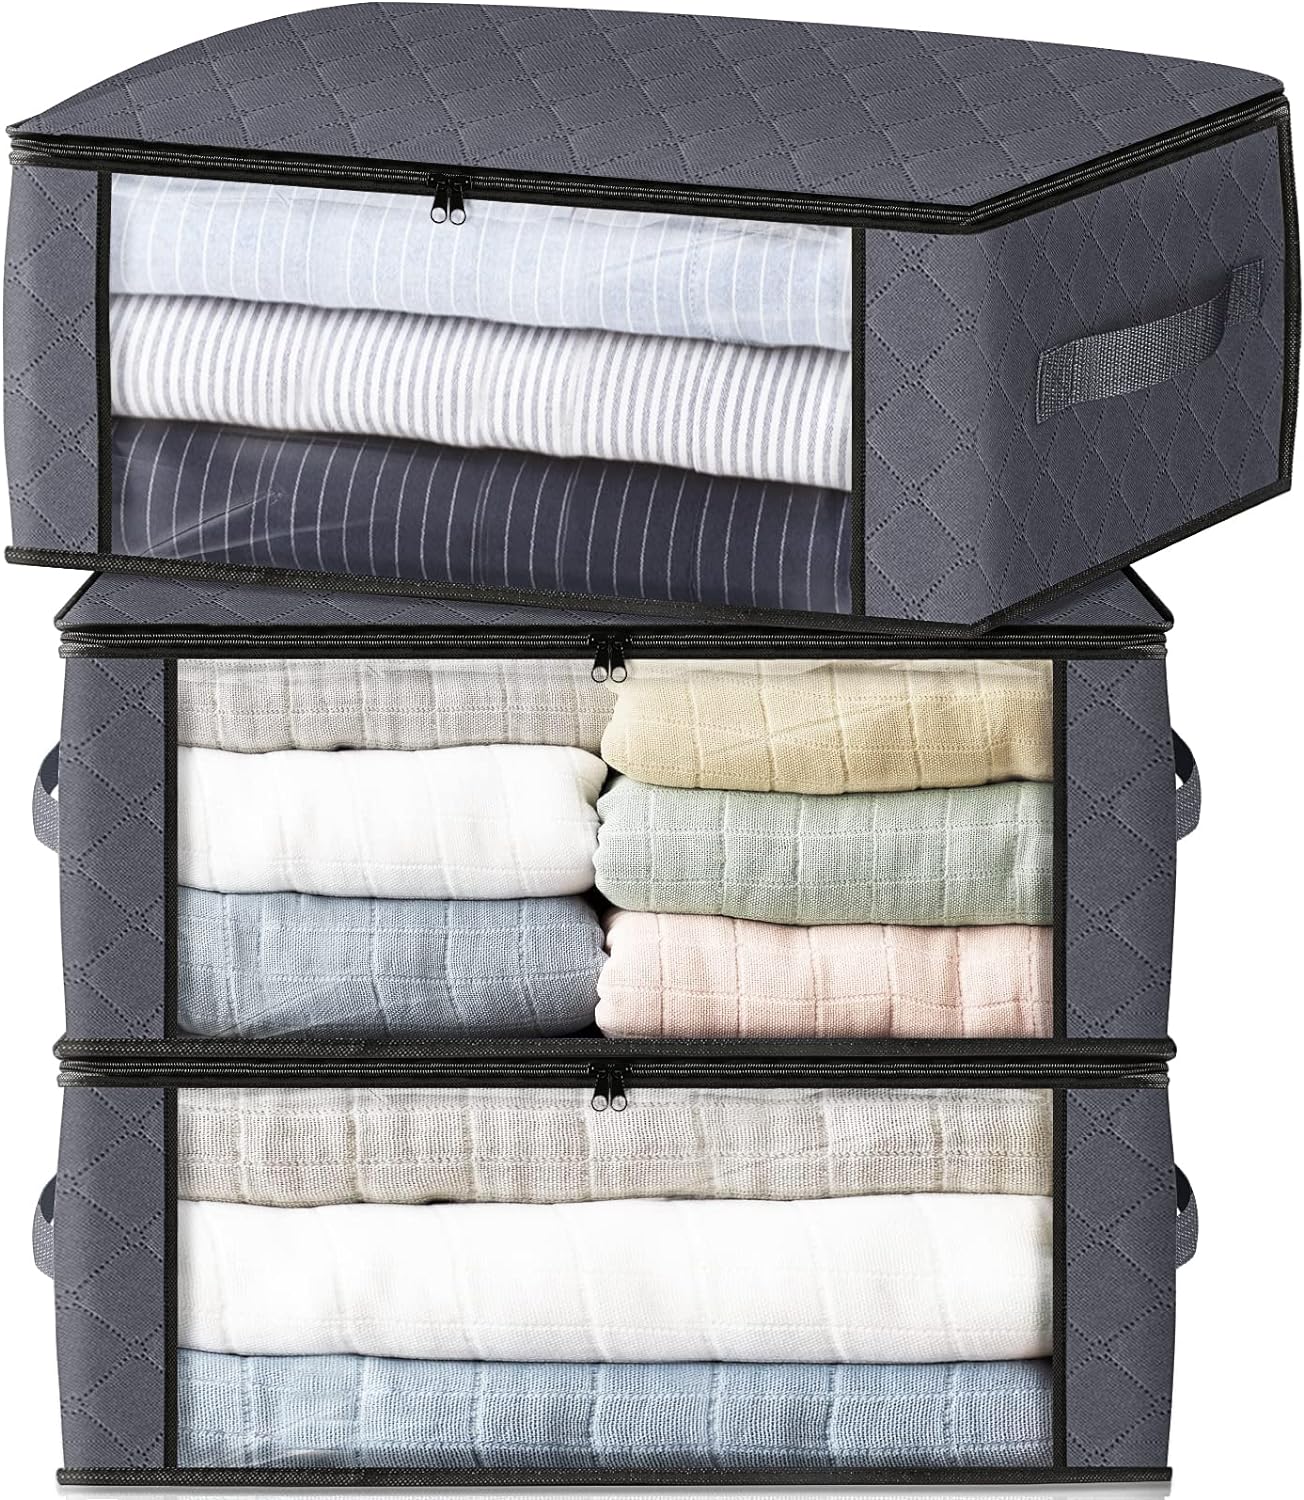 HomeHacks Storage 3-Pack Clothes Organizer Storage Bags Foldable Storage Box with Large Clear Window Sturdy Handles for Closet, Dorm, Pillows, Bedding, Clothes, Stuffed Toys, Blankets, 35L, Grey